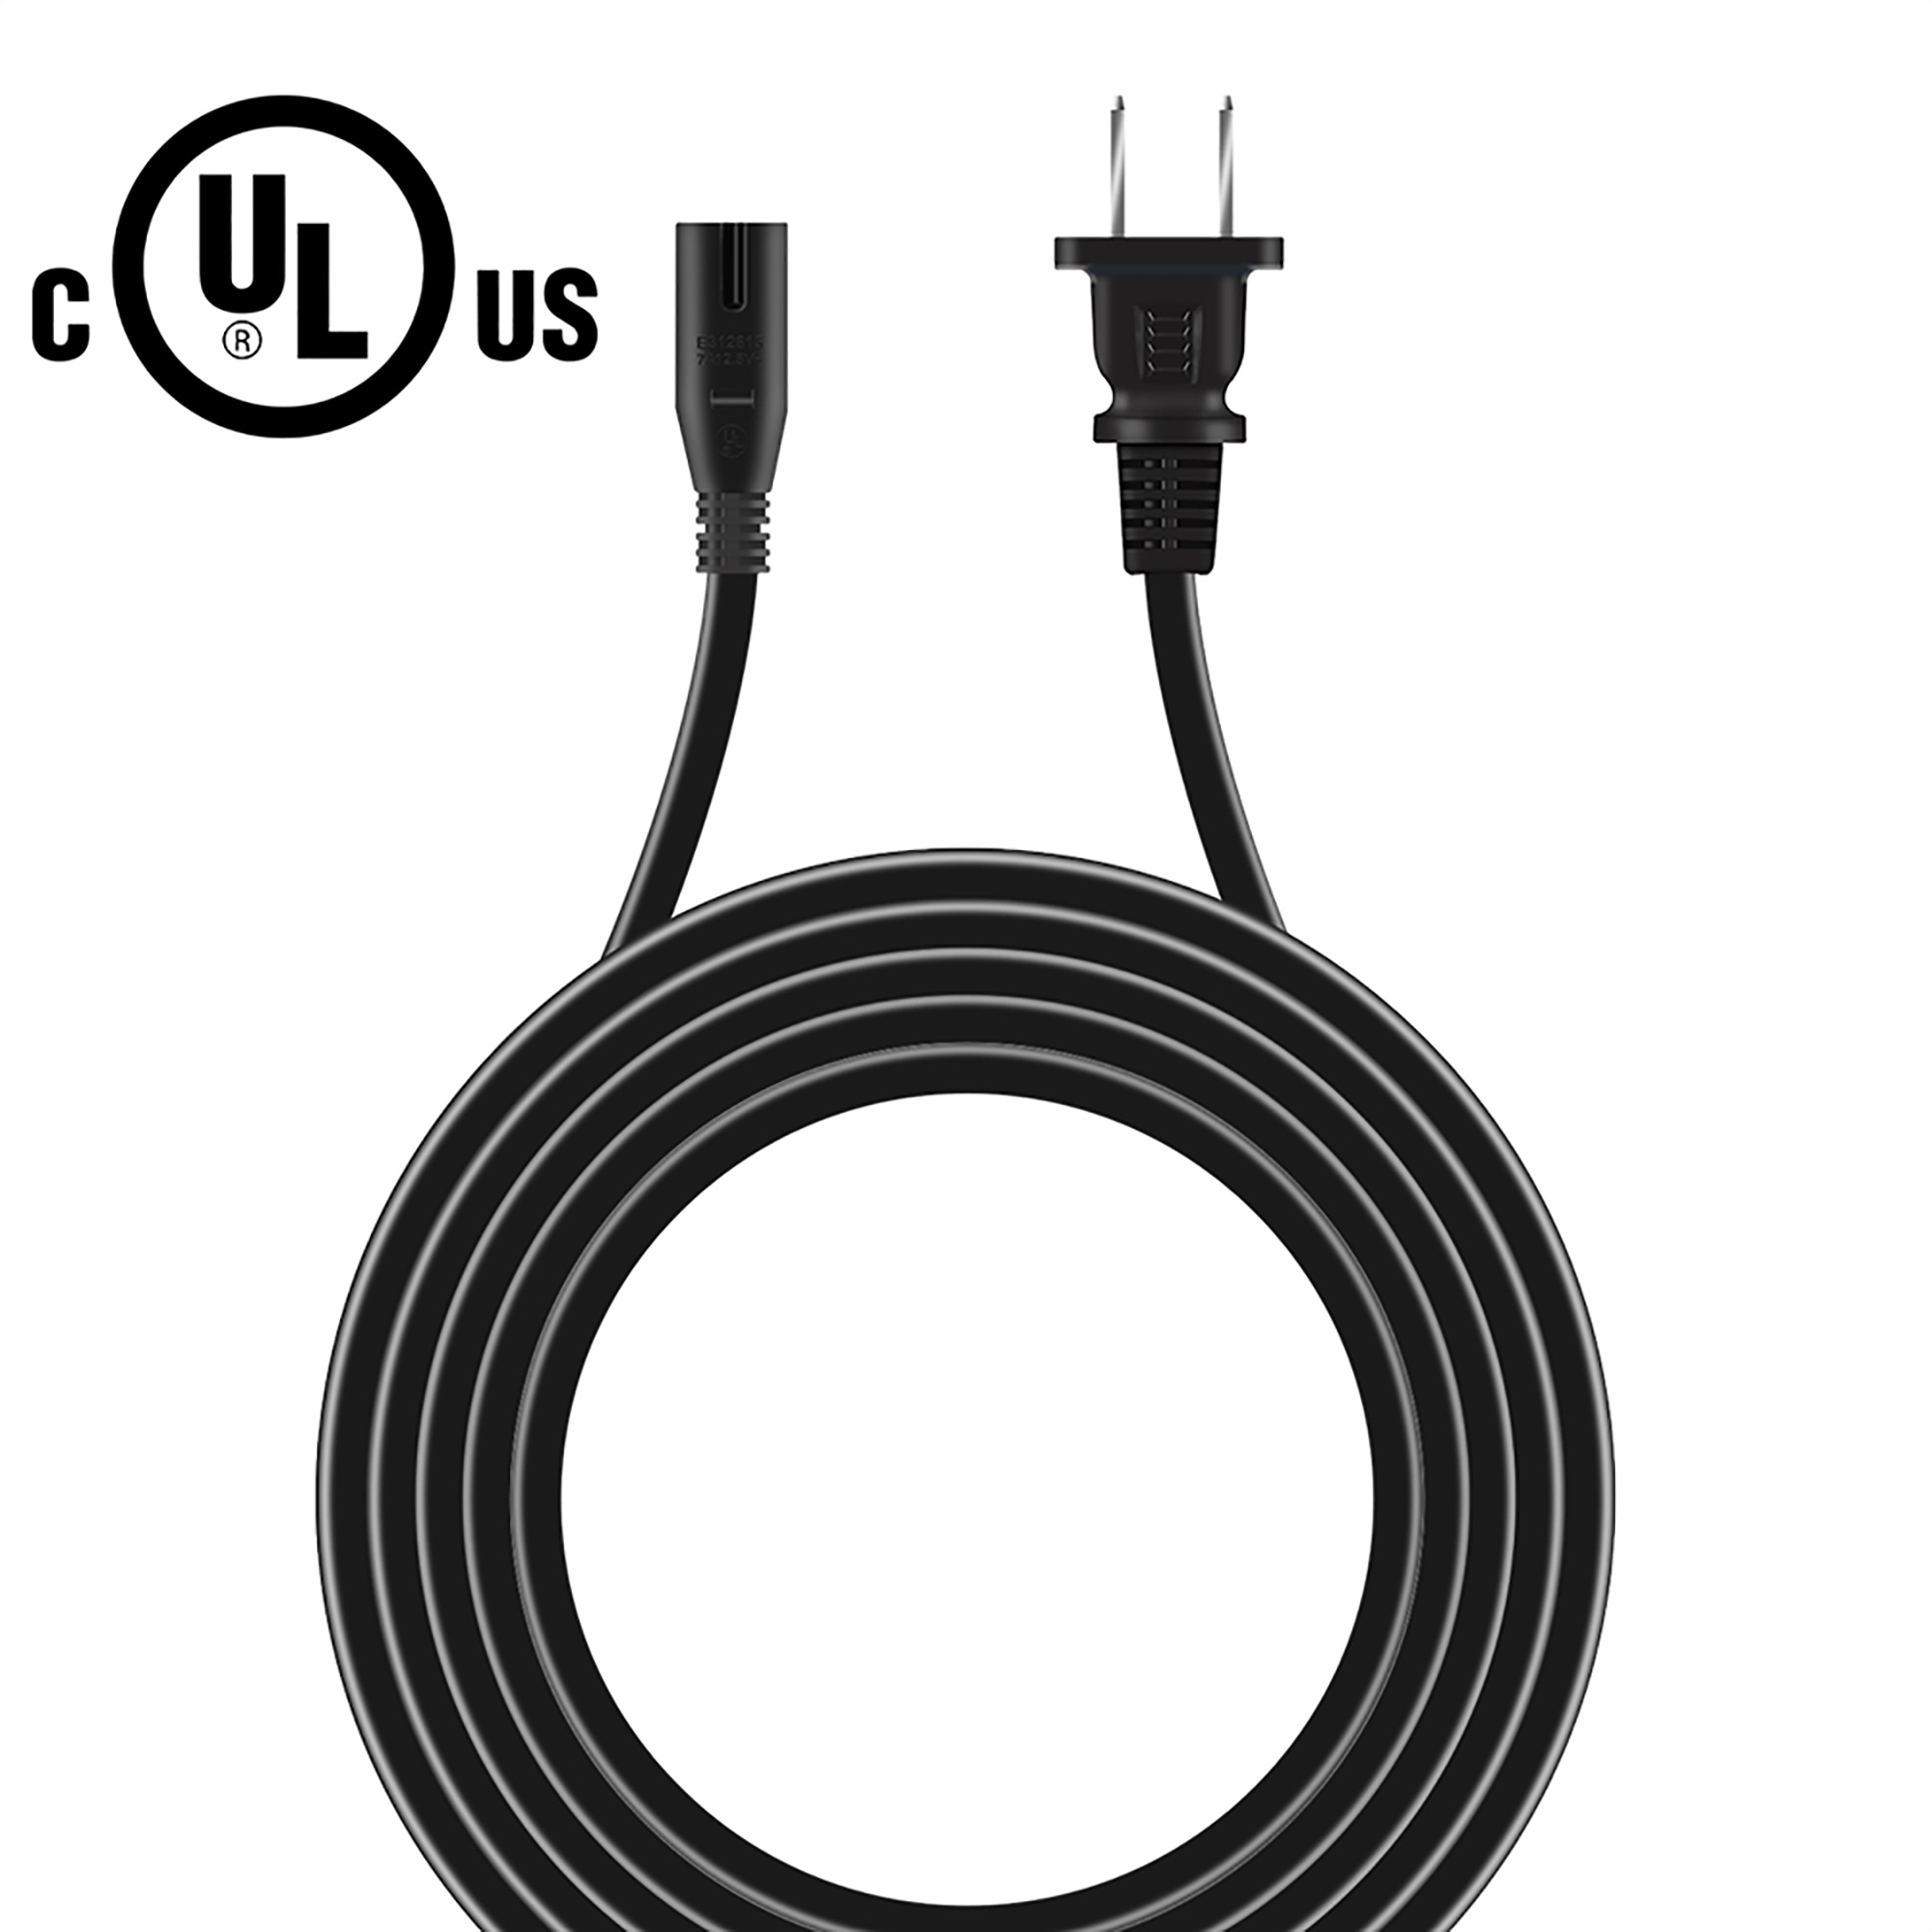 PKPOWER 5ft UL AC Power Cord for Klipsch BAR 40 2.1 Sound Bar with Wireless Subwoofer - image 1 of 3